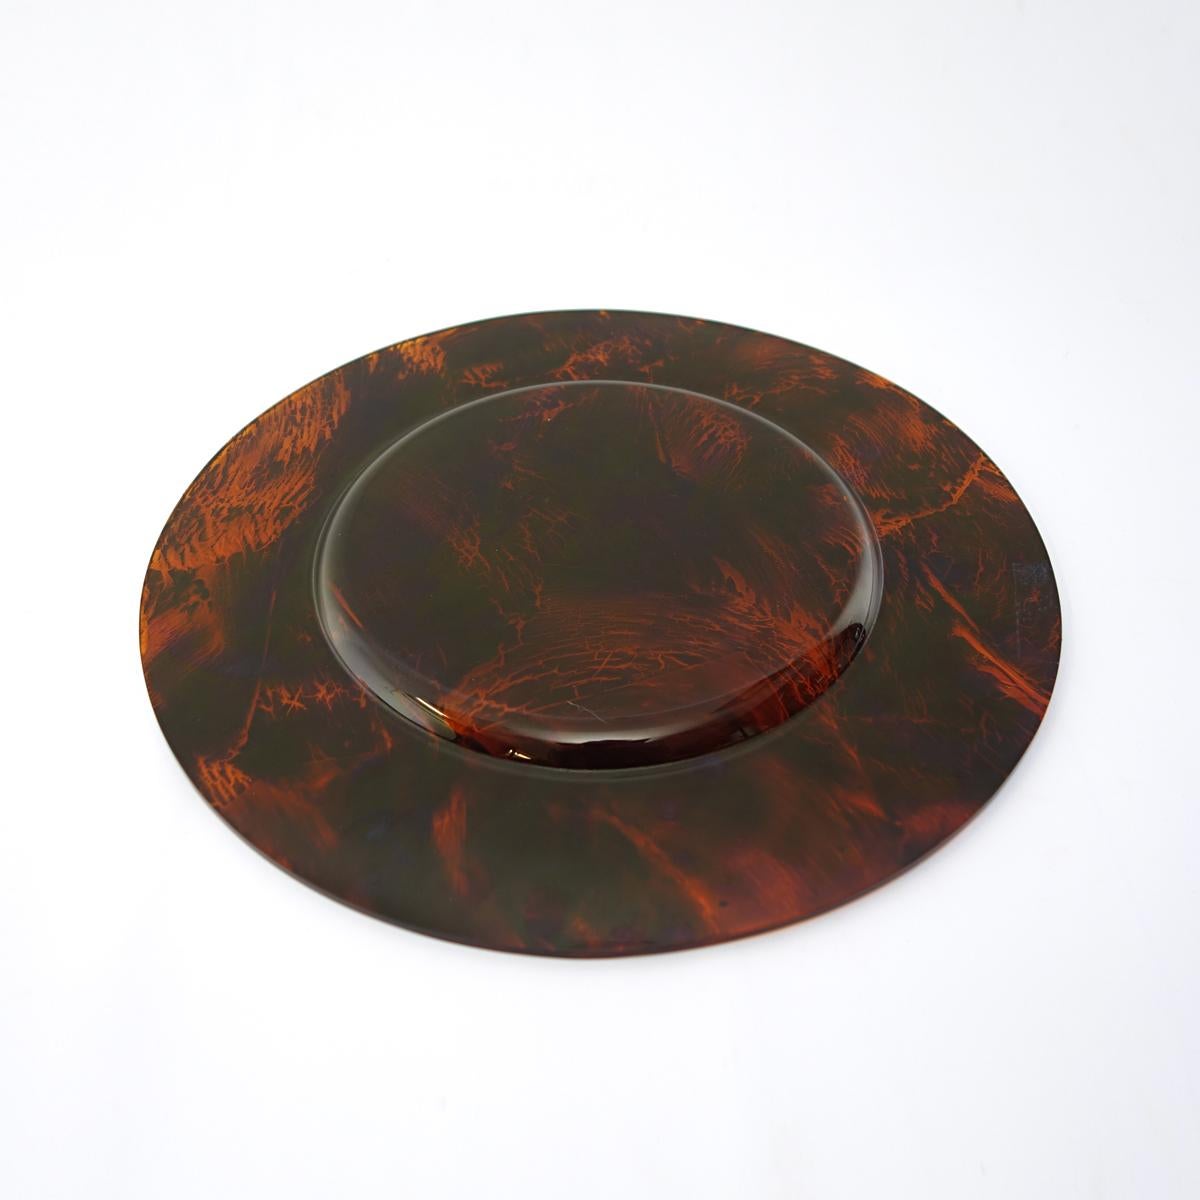 70s Rare Octagonal Faux Tortoise Tray with Four Round Plates Attributed to Dior For Sale 2